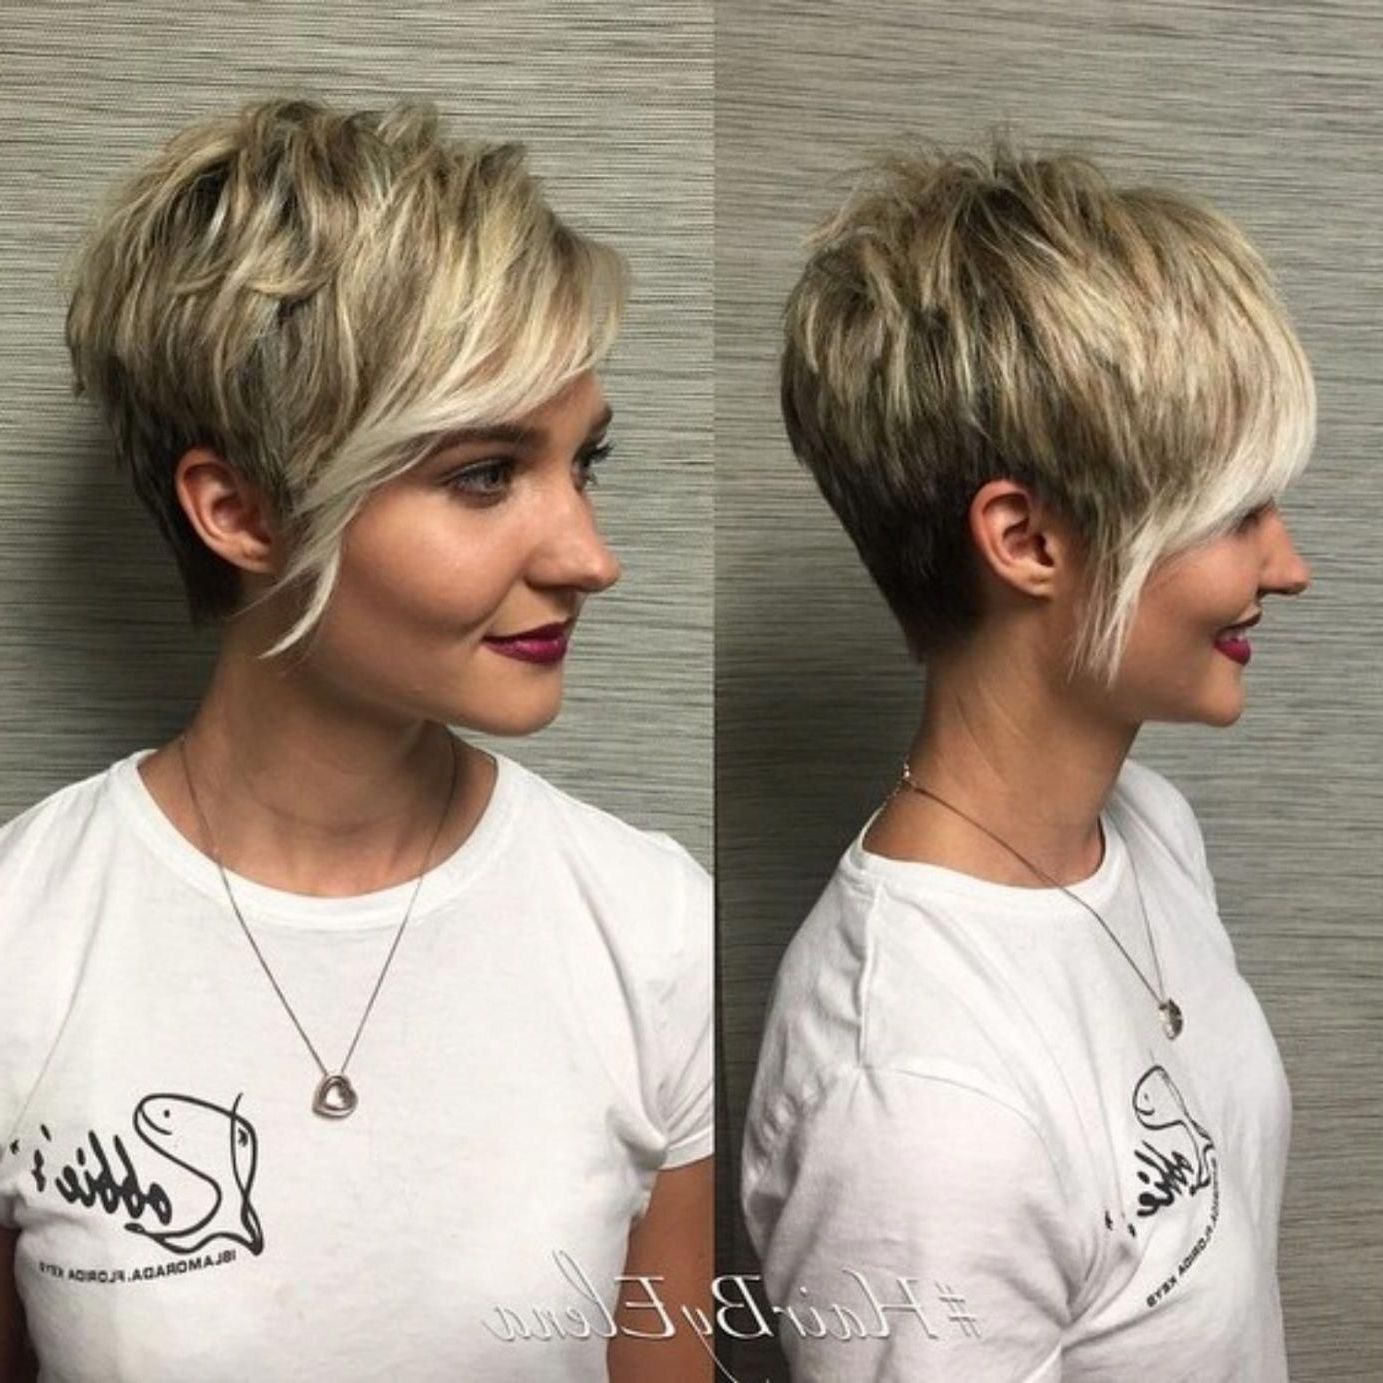 Edgy Asymmetrical Haircut #shortpixie In 2020 Regarding Widely Used Asymmetrical Pixie Hairstyles With Pops Of Color (View 20 of 20)